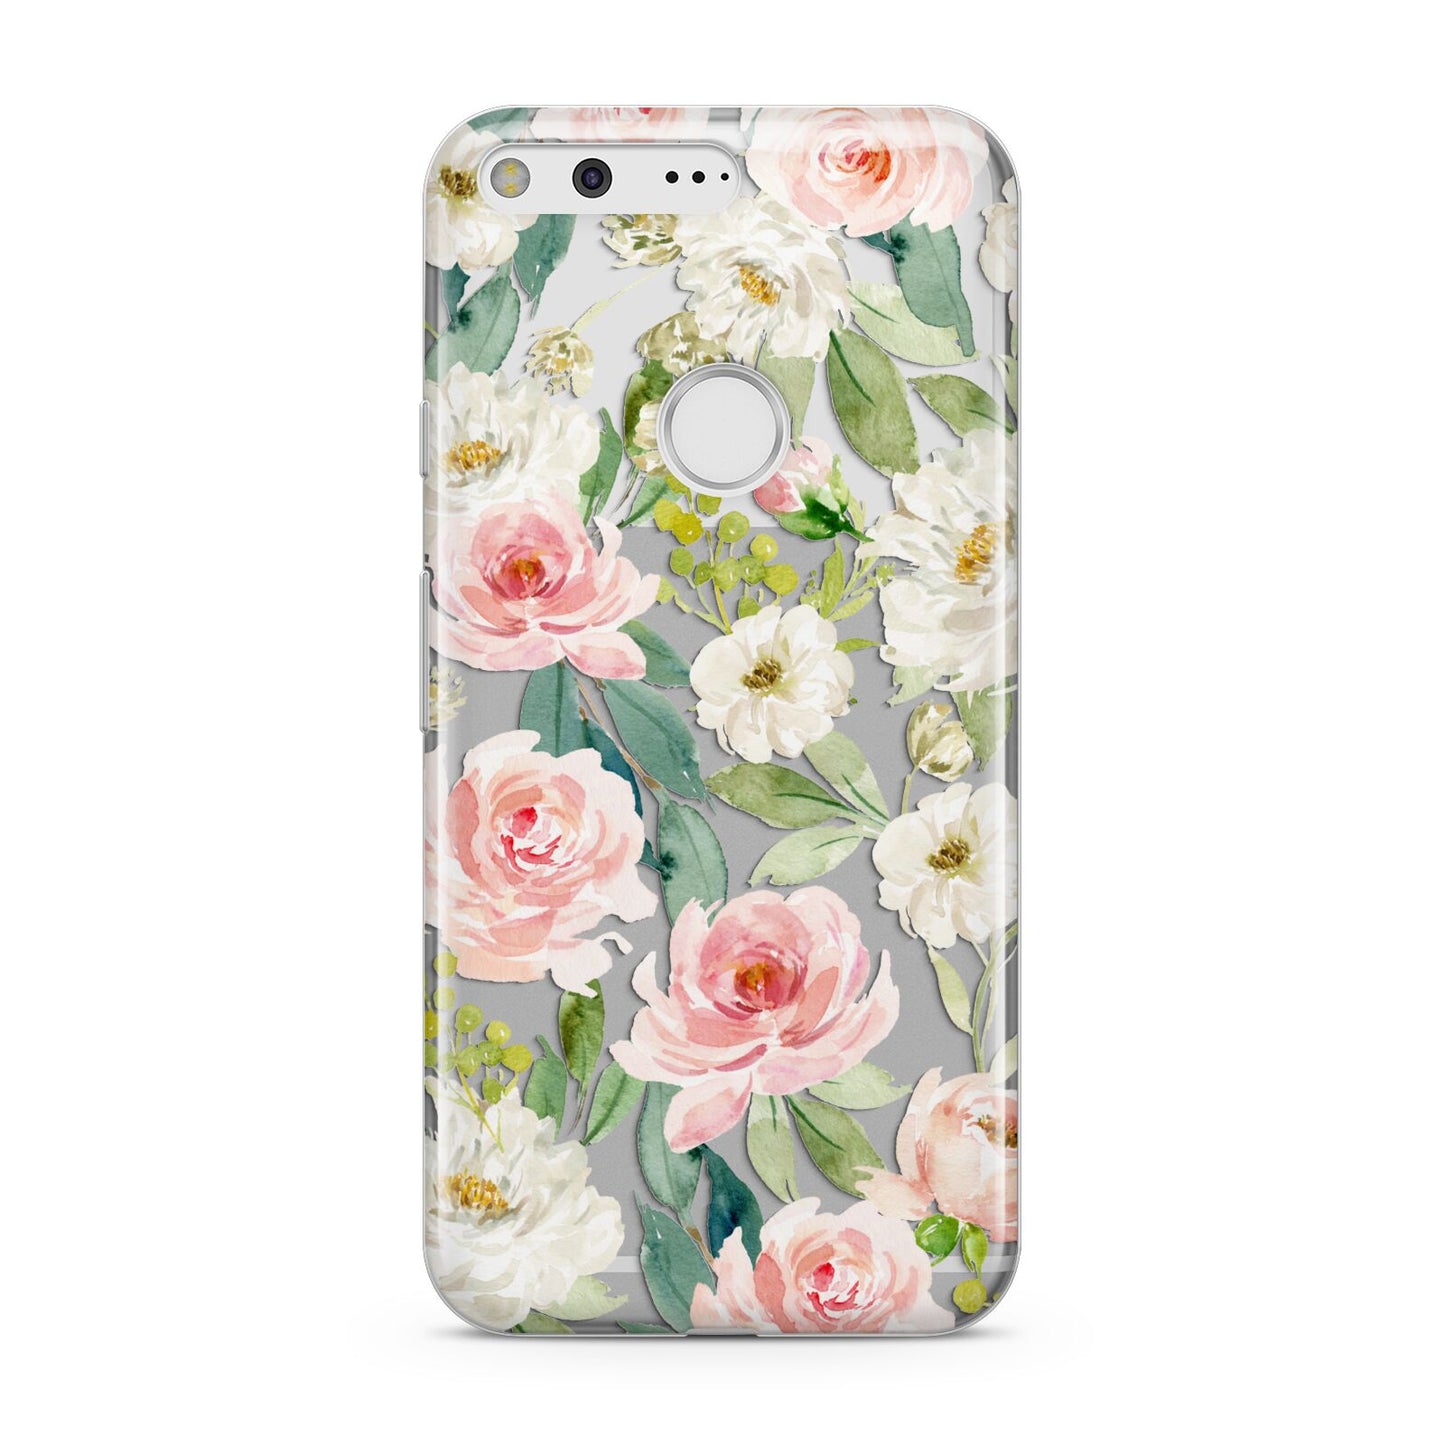 Watercolour Peonies Roses and Foliage Google Pixel Case